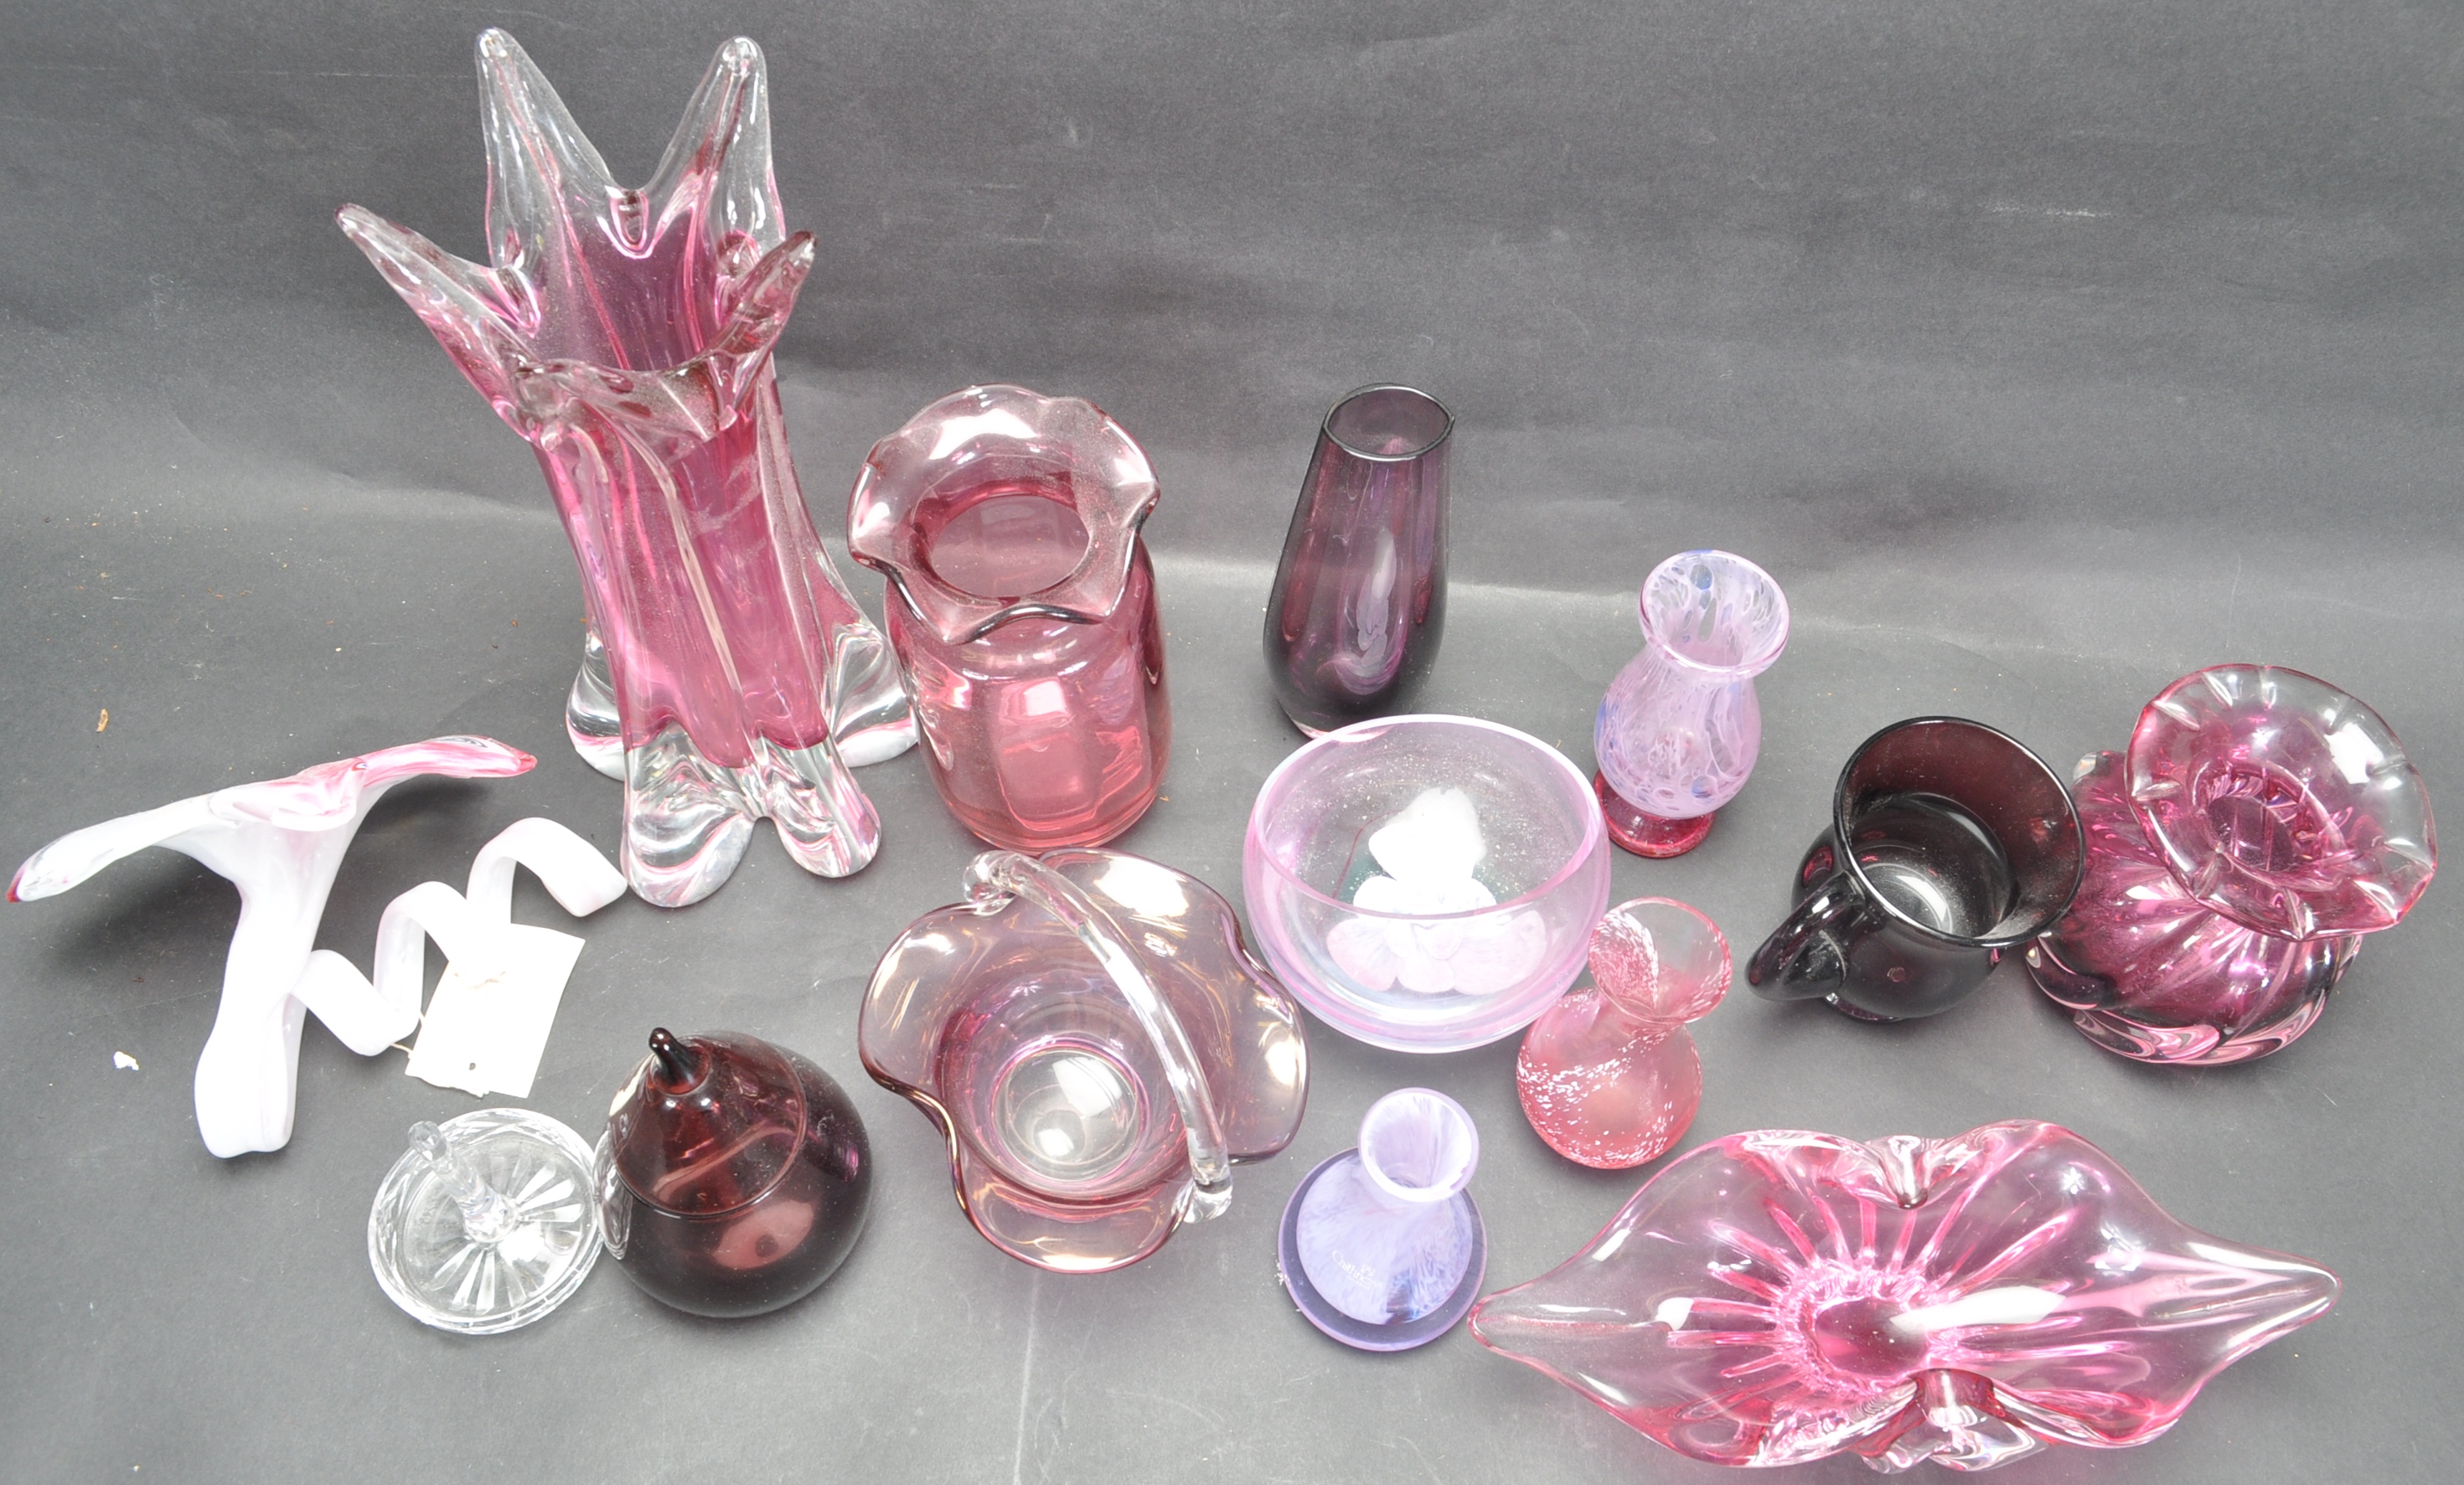 COLLECTION OF 20TH CENTURY GLASS VASES AND ORNAMENTS. - Image 6 of 9